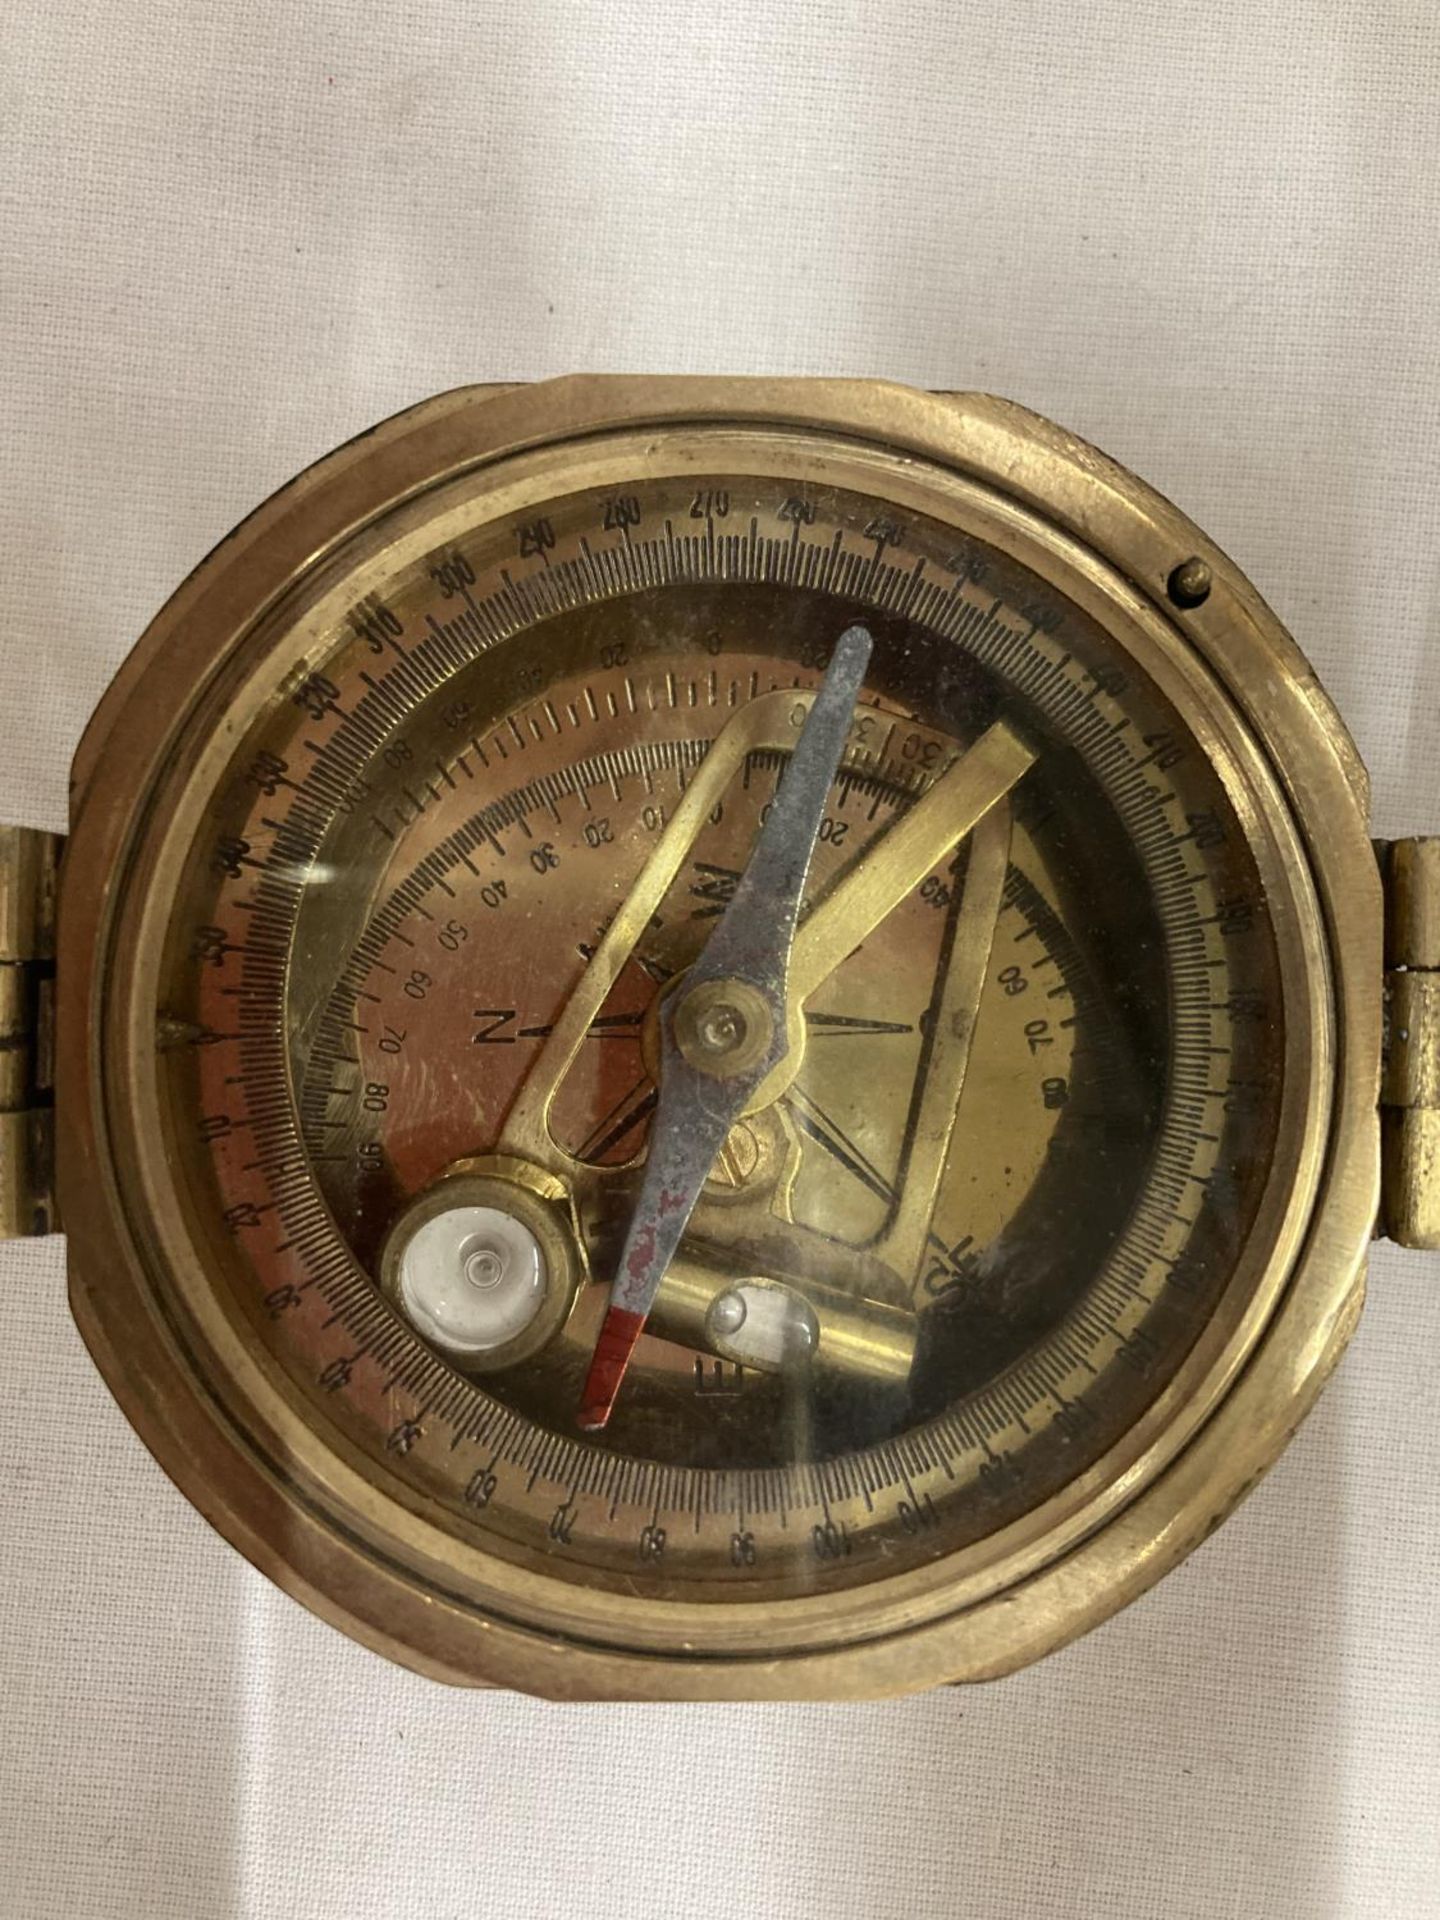 A POLISHED BRASS BRUNTON STYLE EXPLORERS' COMPASS - Image 4 of 5